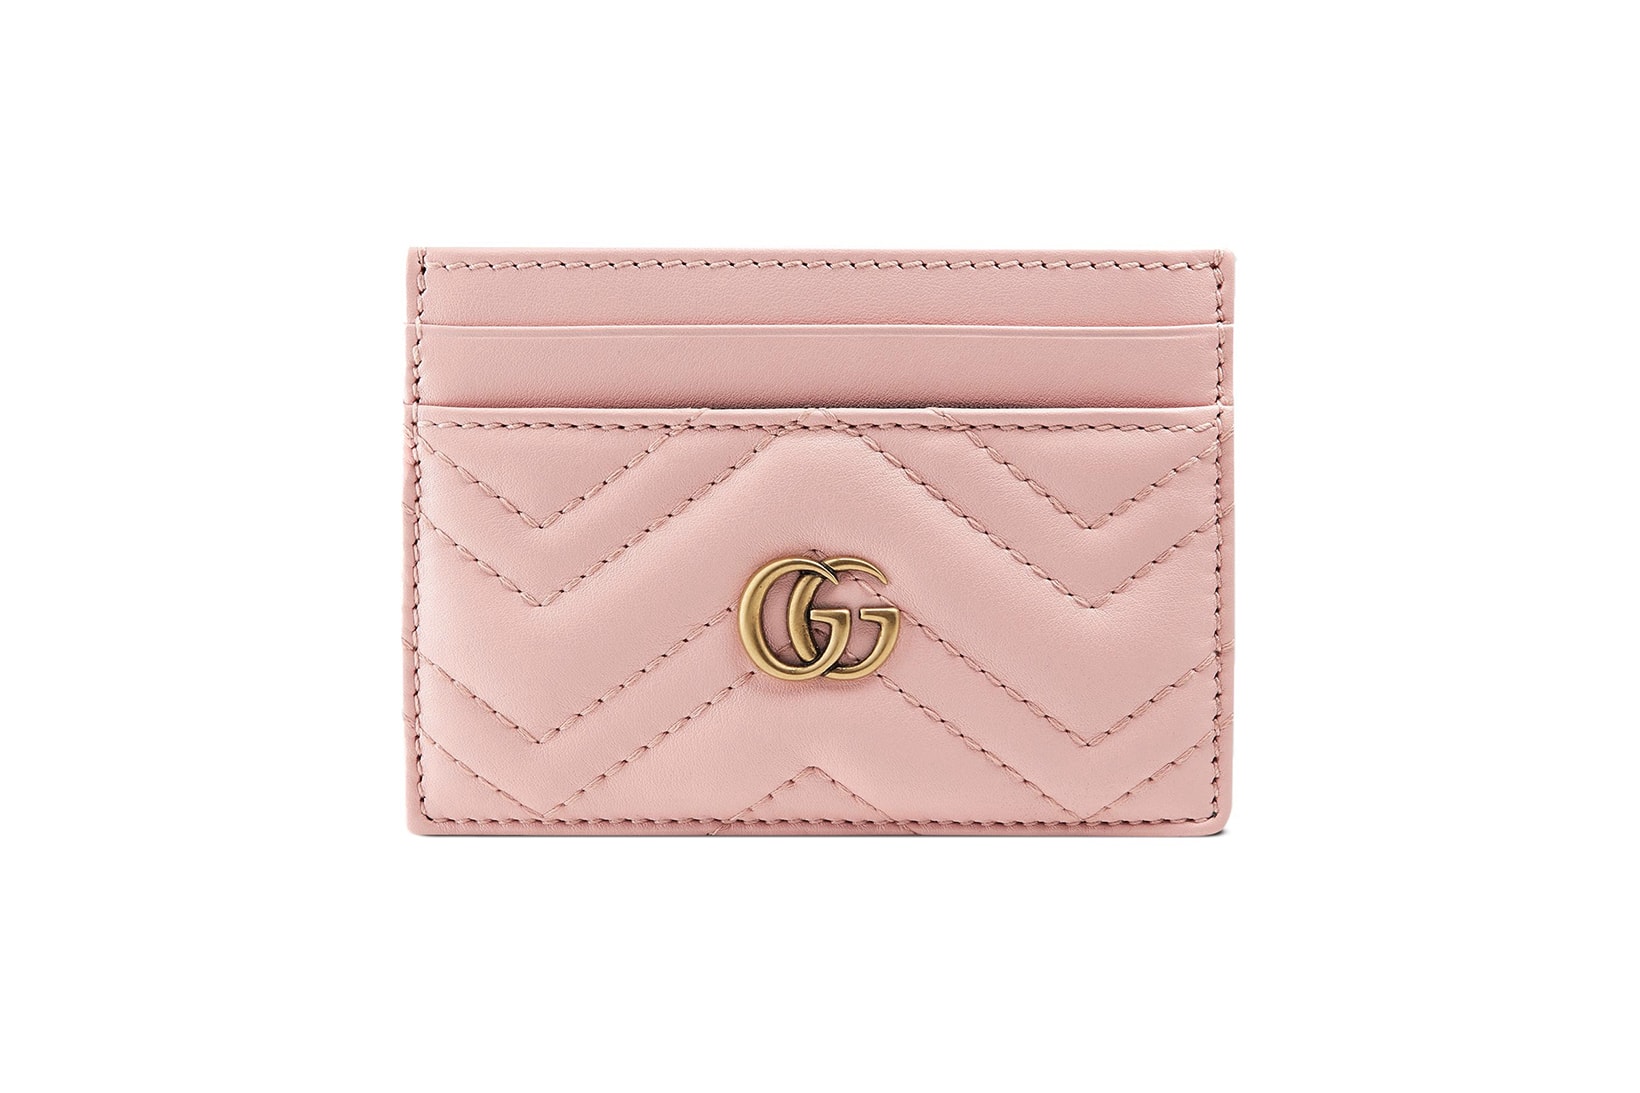 Gucci Leather Marmont Card Case Light Dusty Pink Hibiscus Red Black